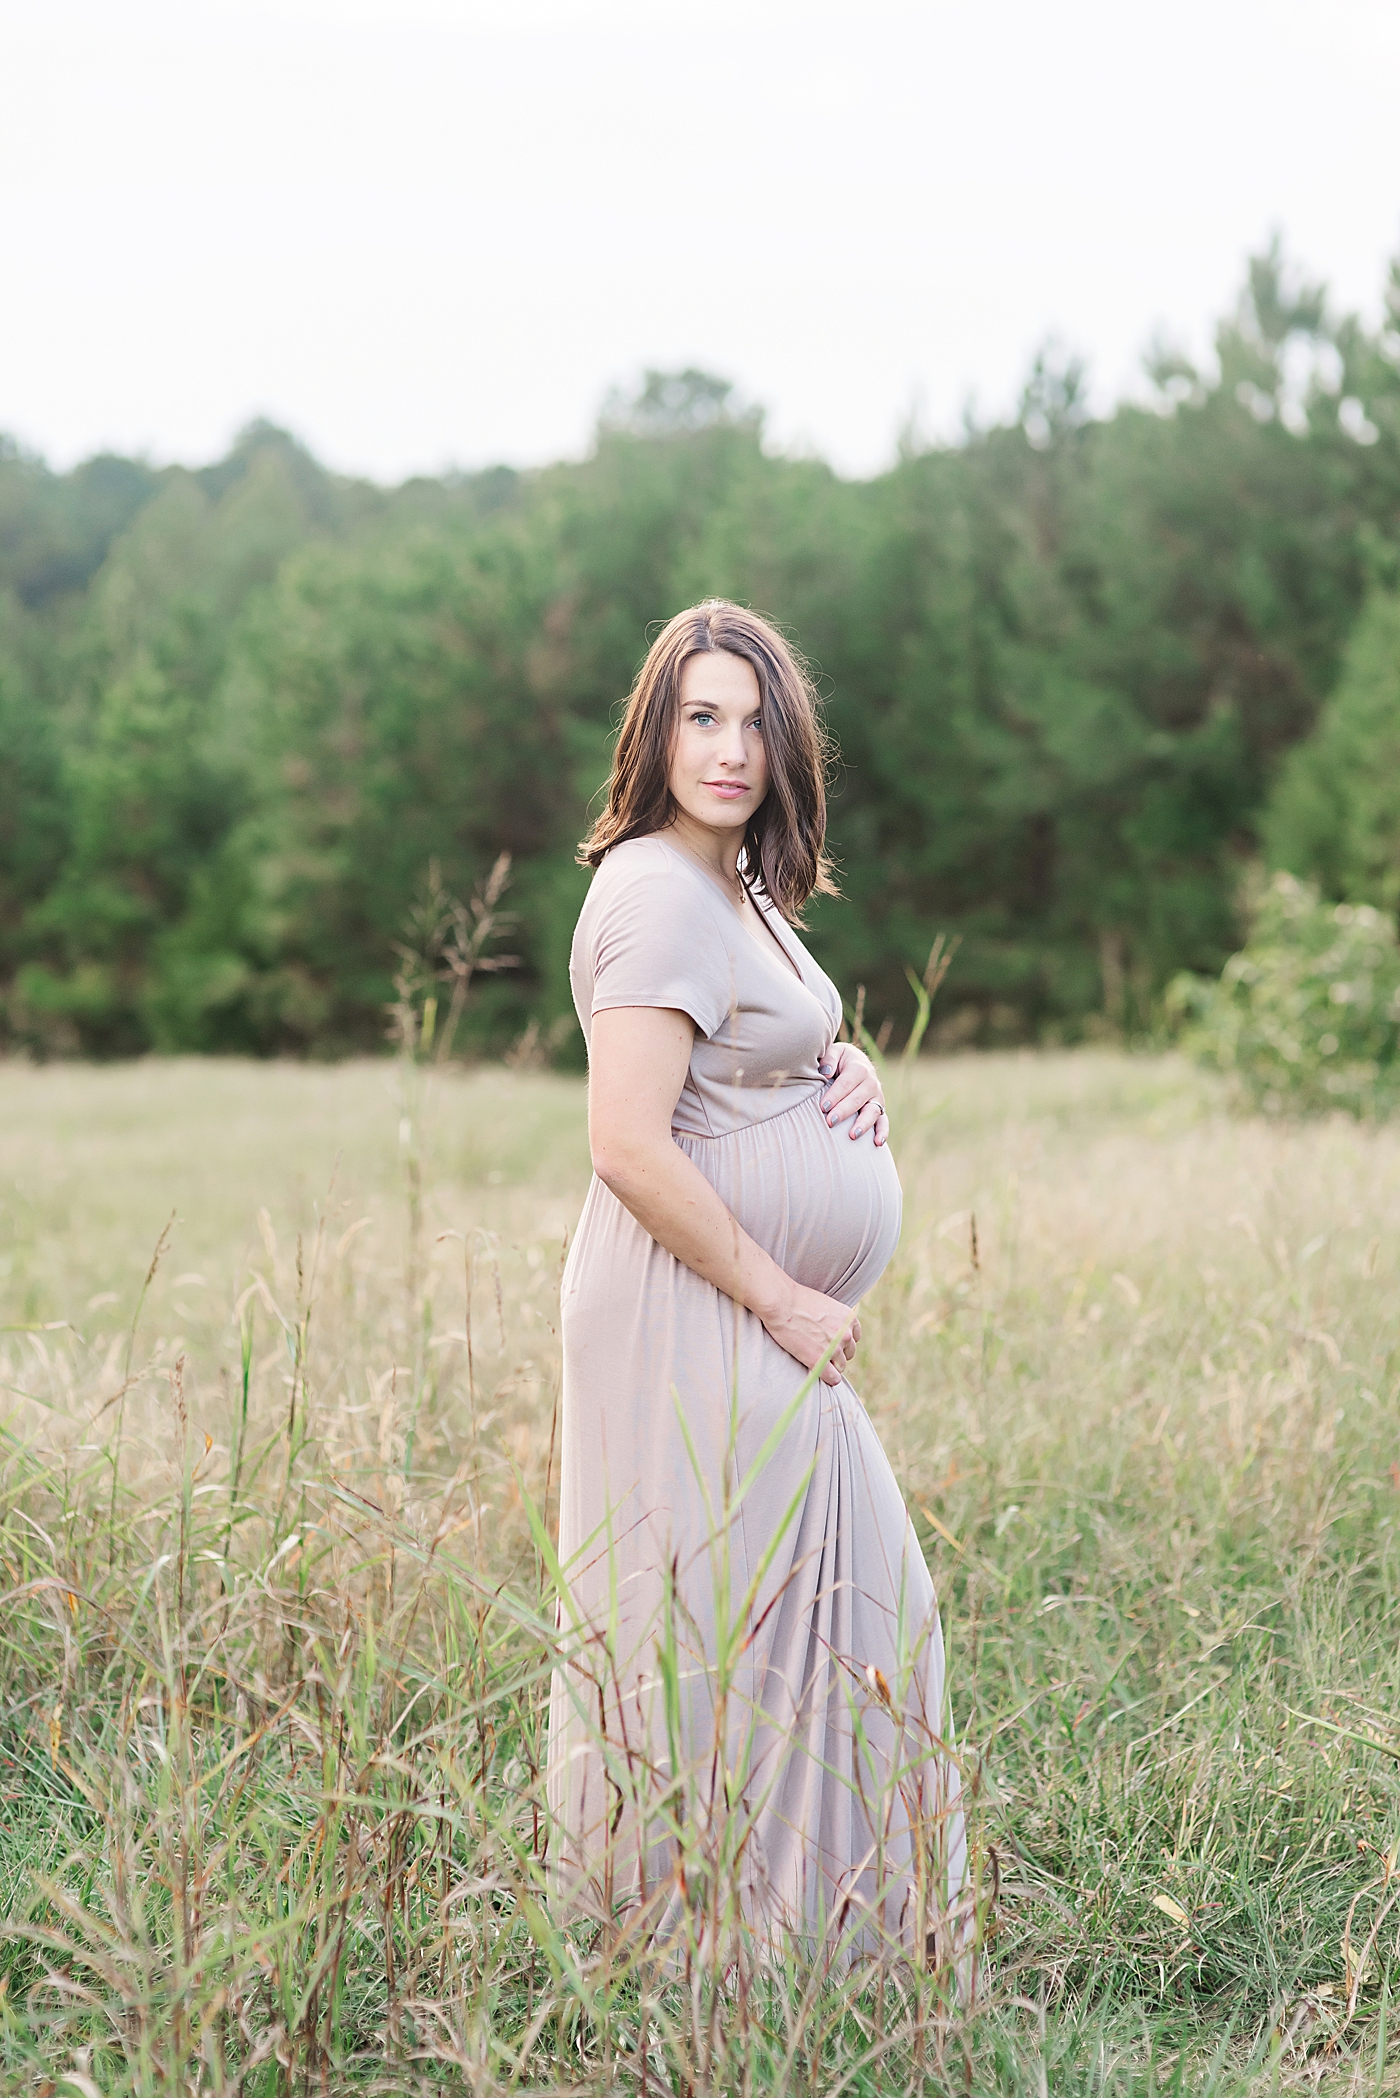 Beautiful mom to be standing in a field | Photo by Anna Wisjo